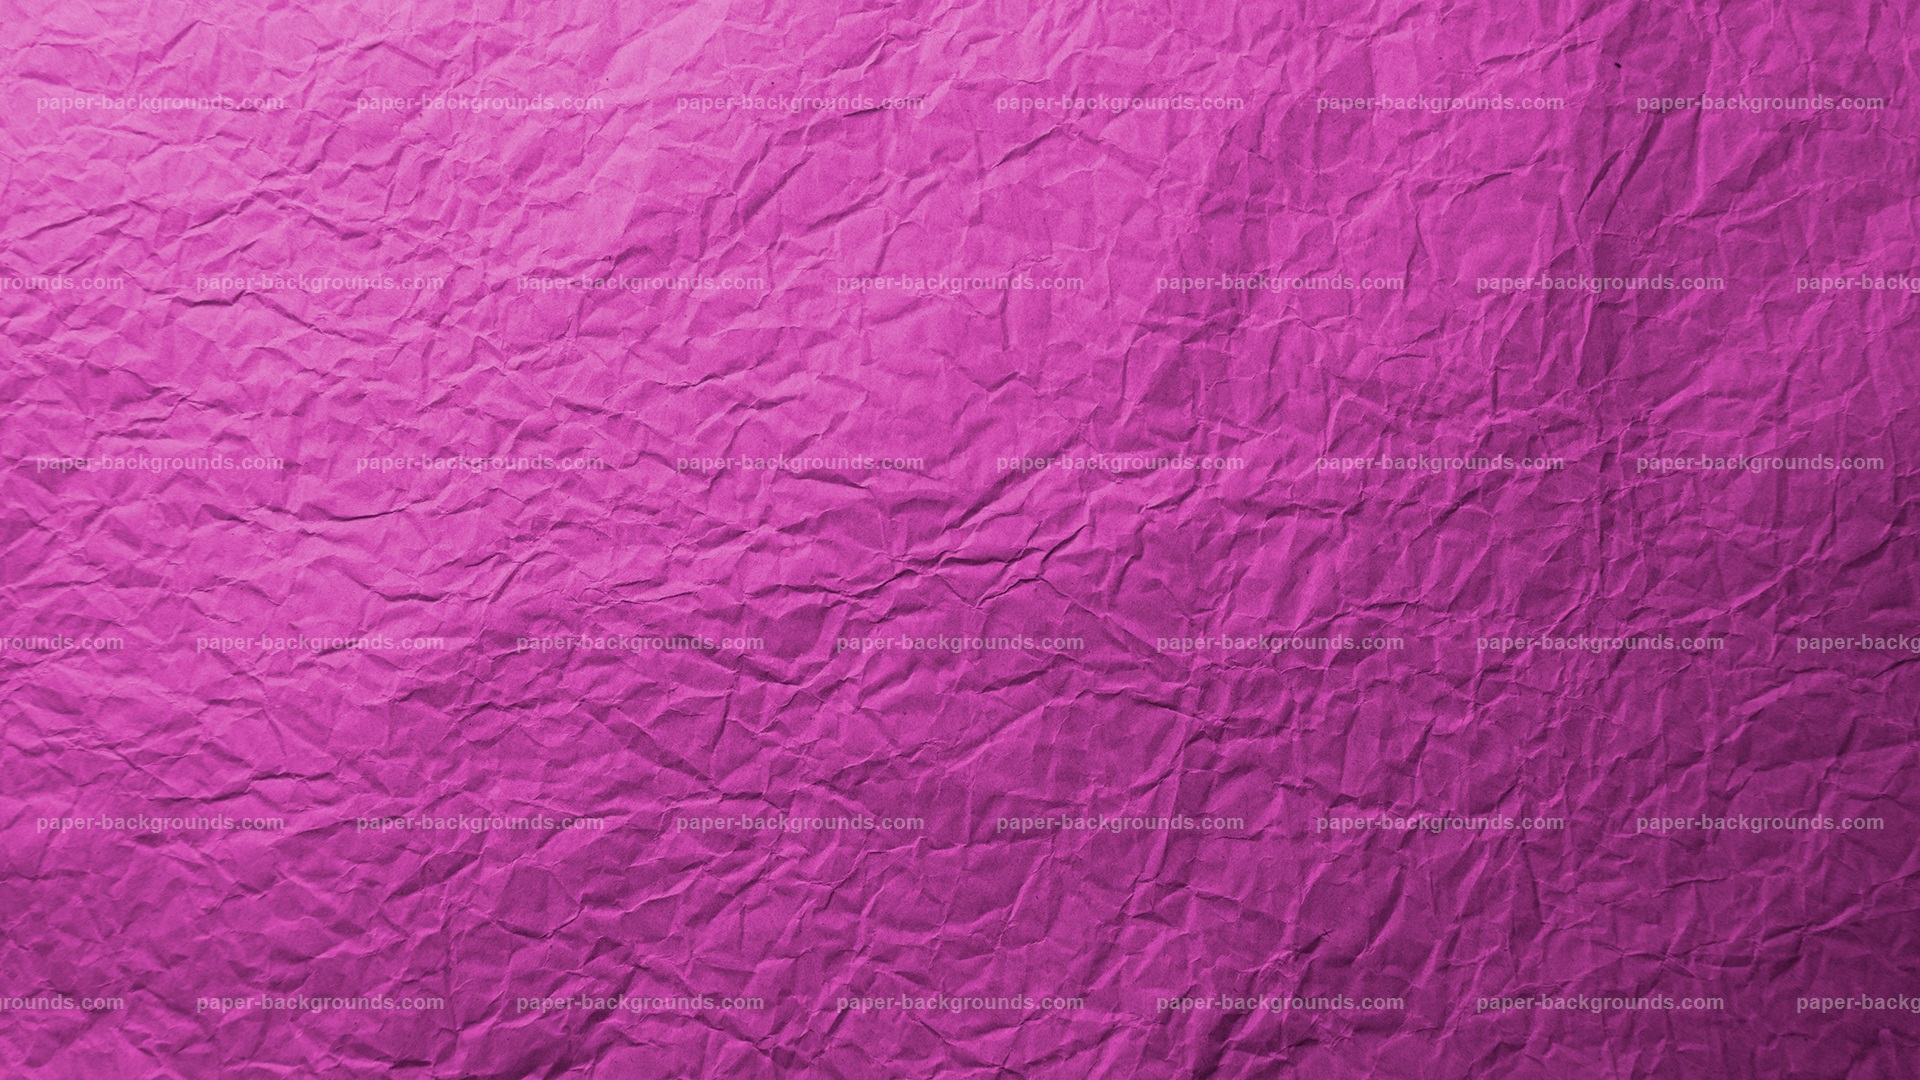 Purple Wrinkled Paper Texture HD Paper Backgrounds